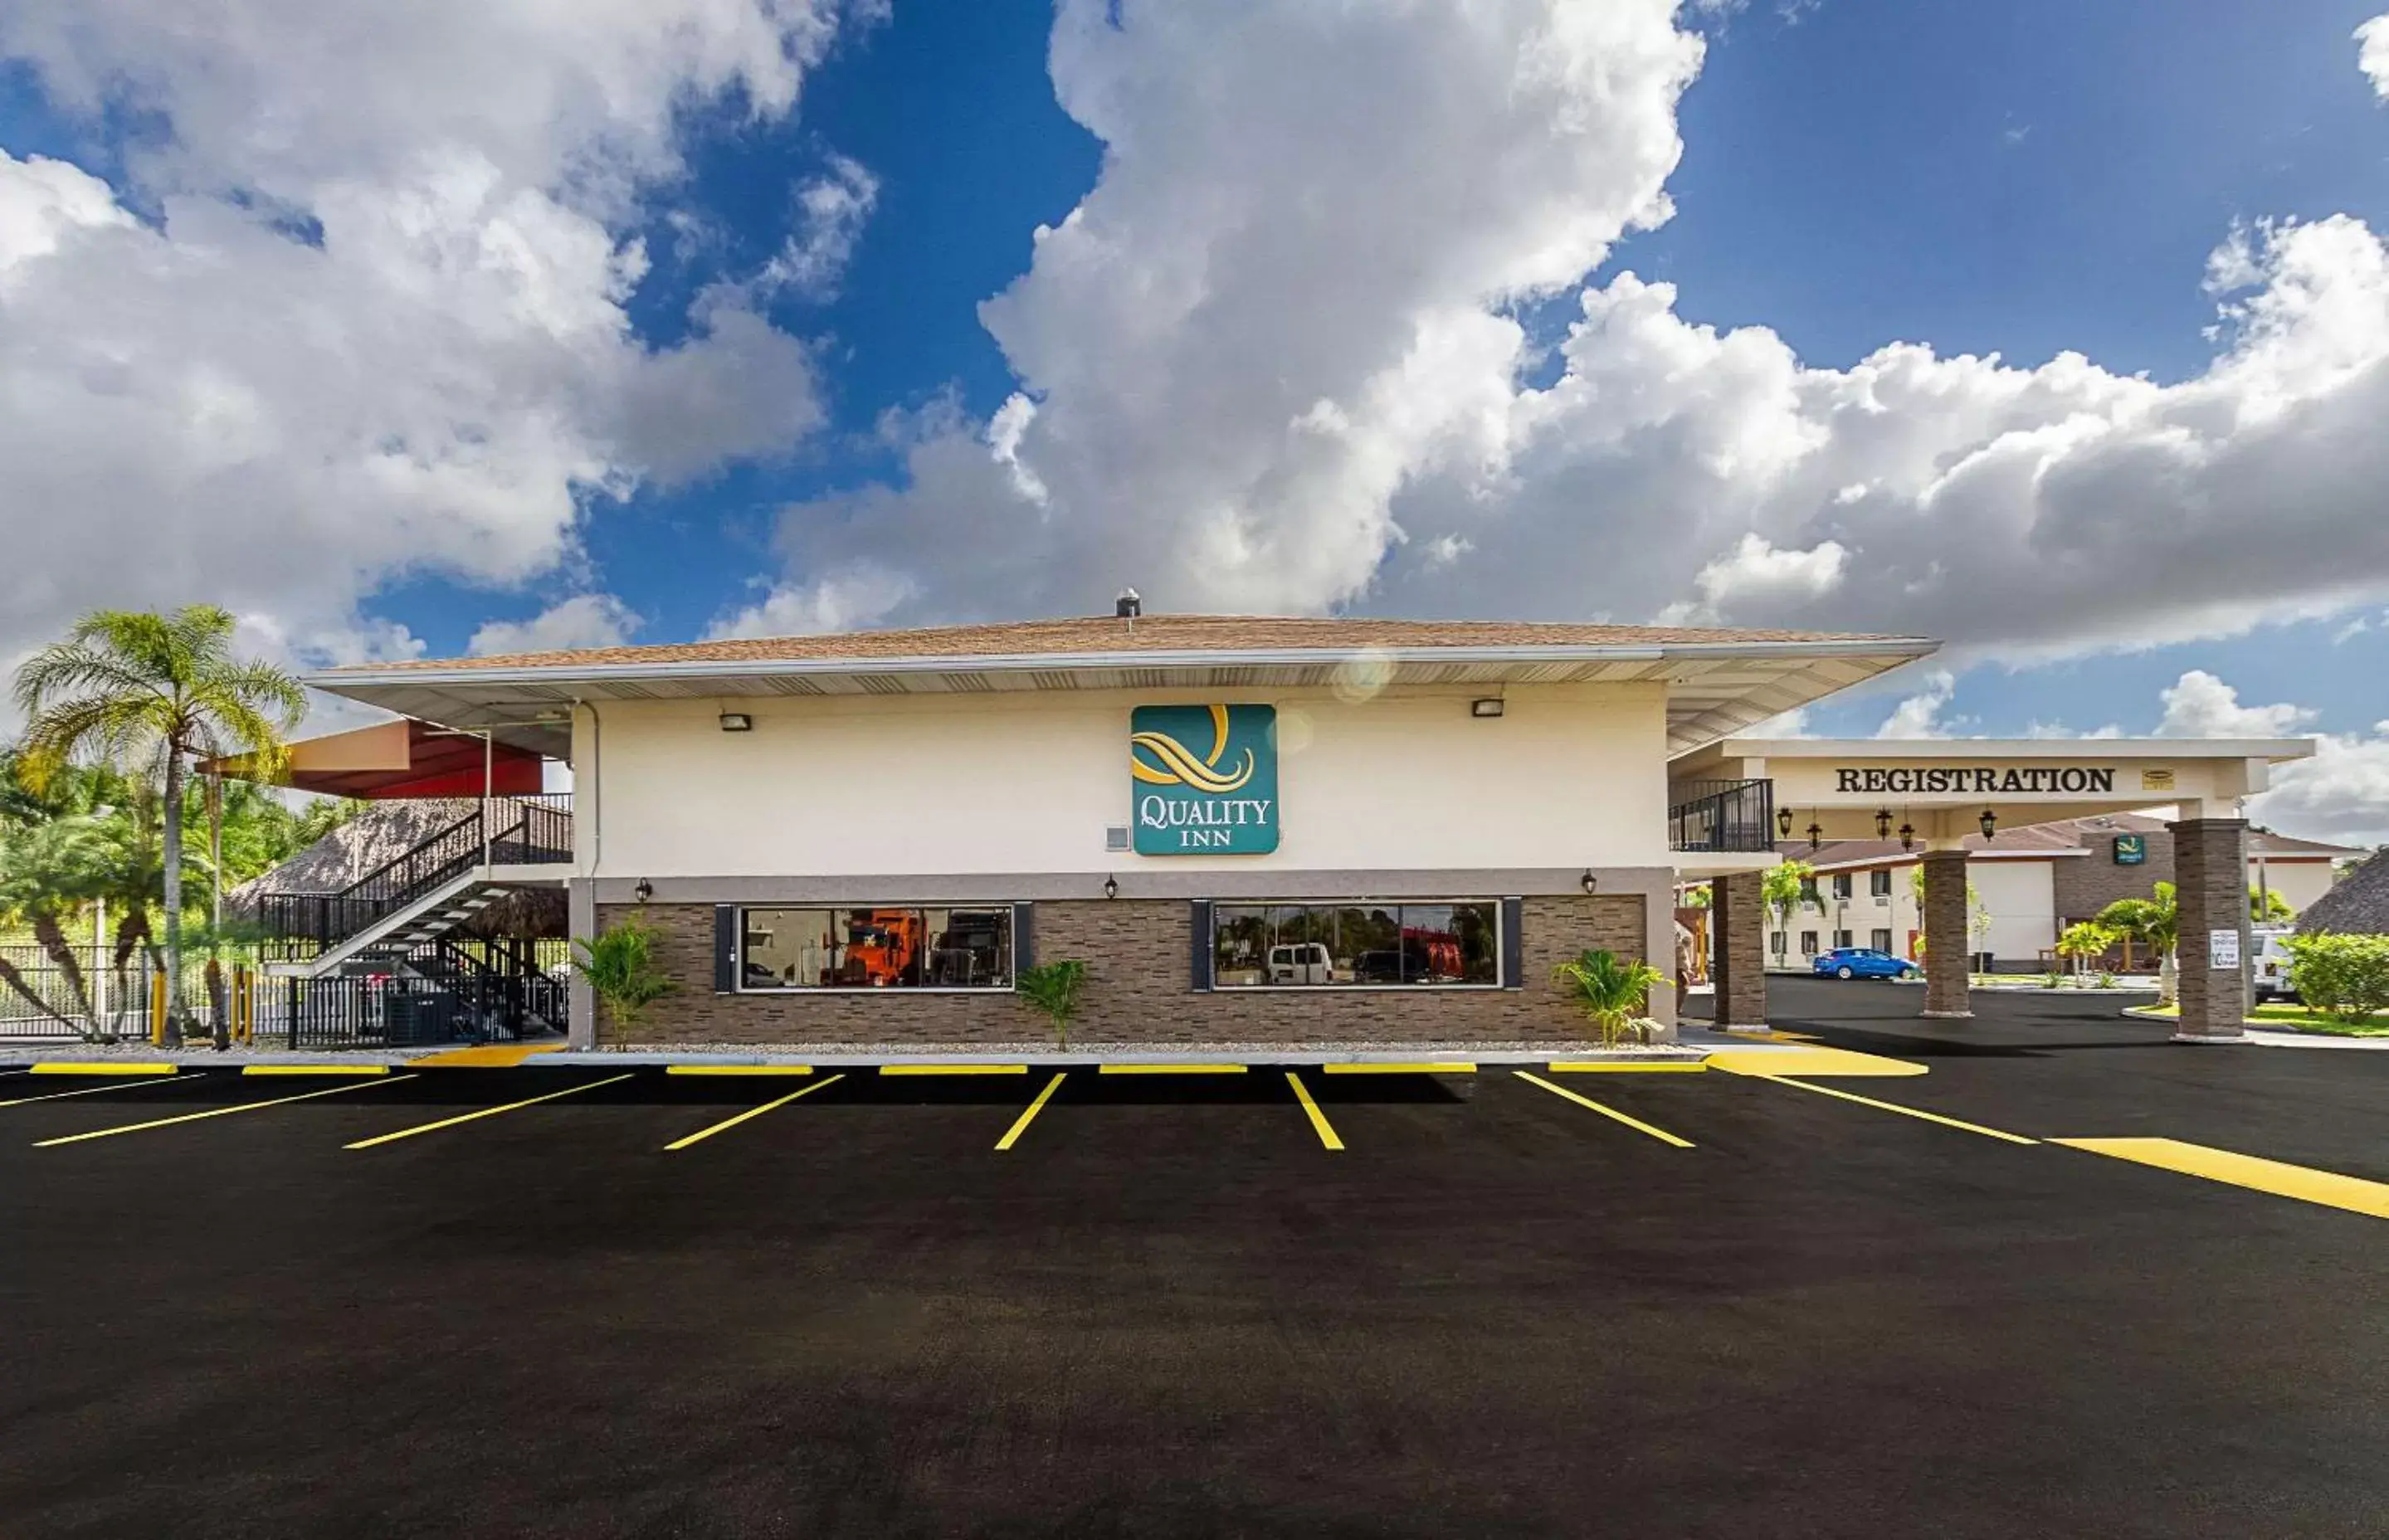 Property Building in Quality Inn Florida City - Gateway to the Keys